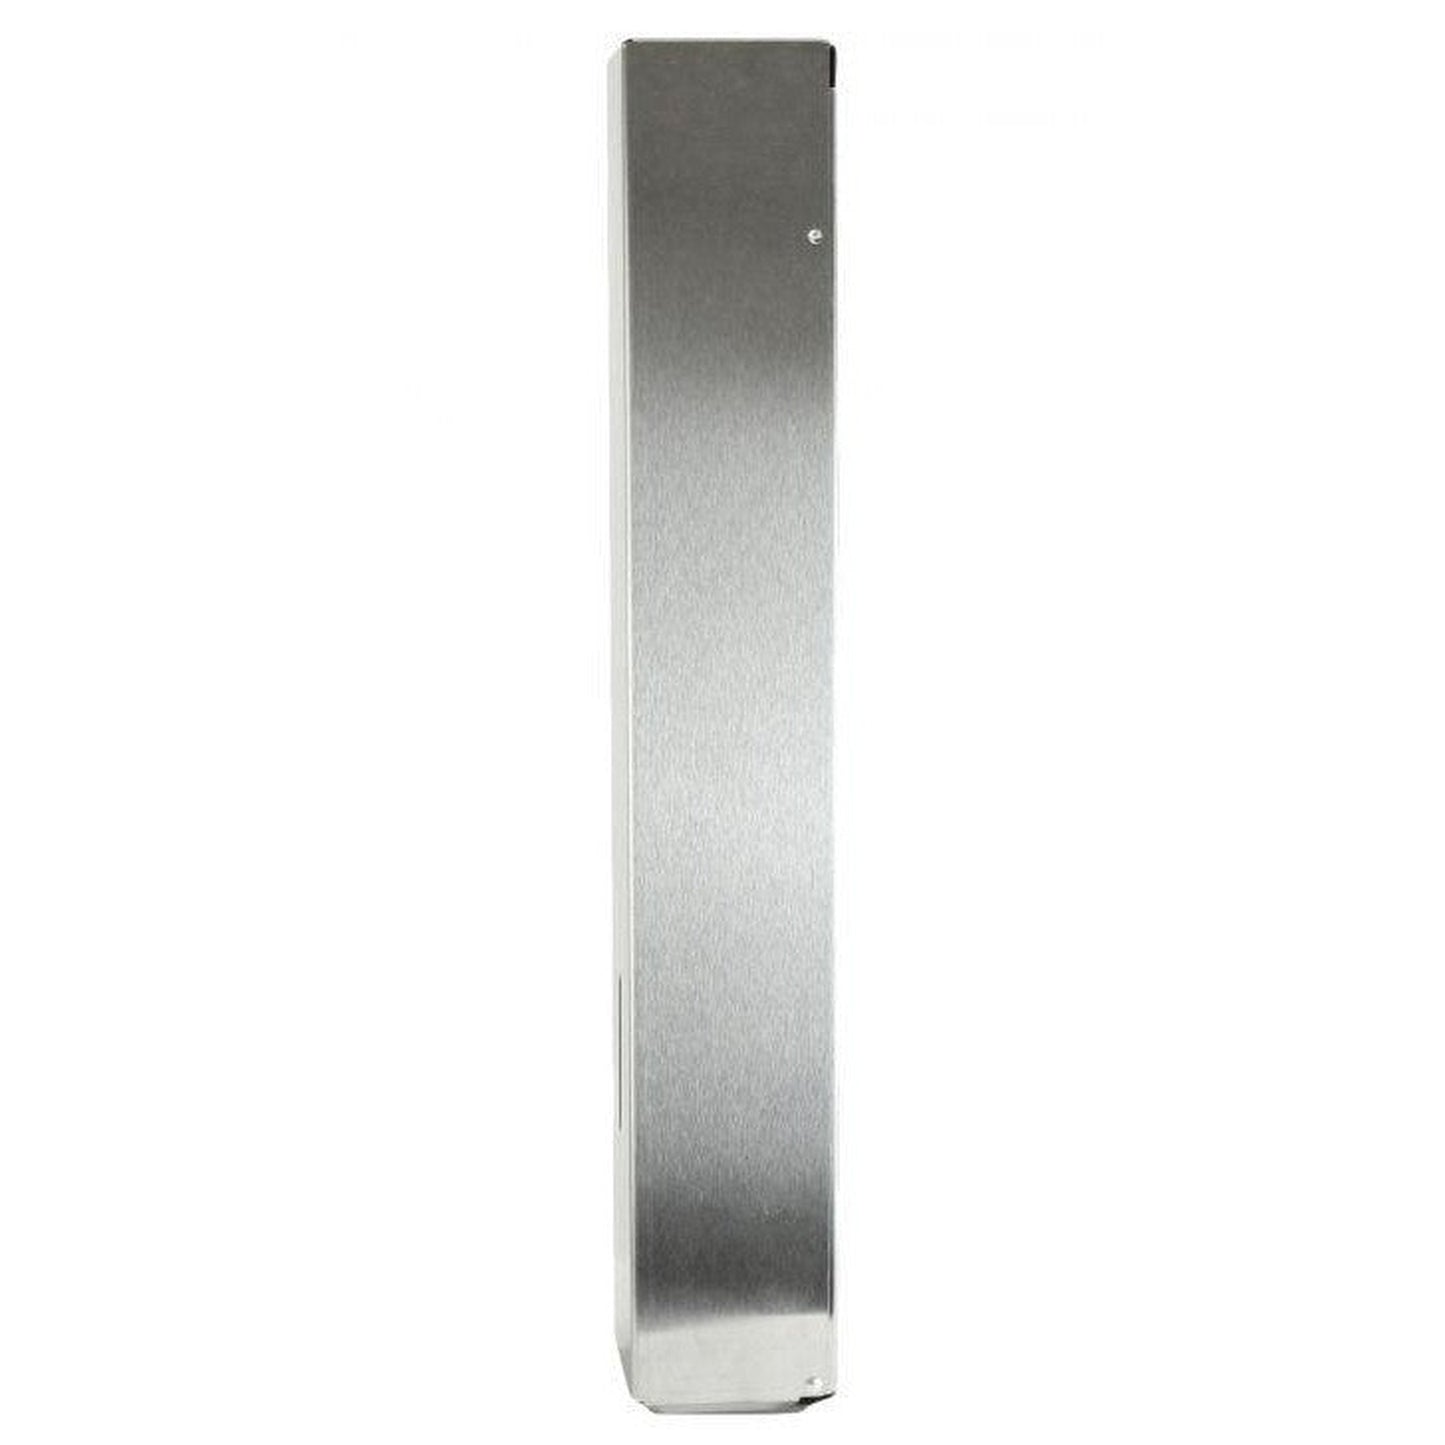 Frost 2.75 x 18.25 x 2.75 Stainless Steel Satin Paper Product Dispenser